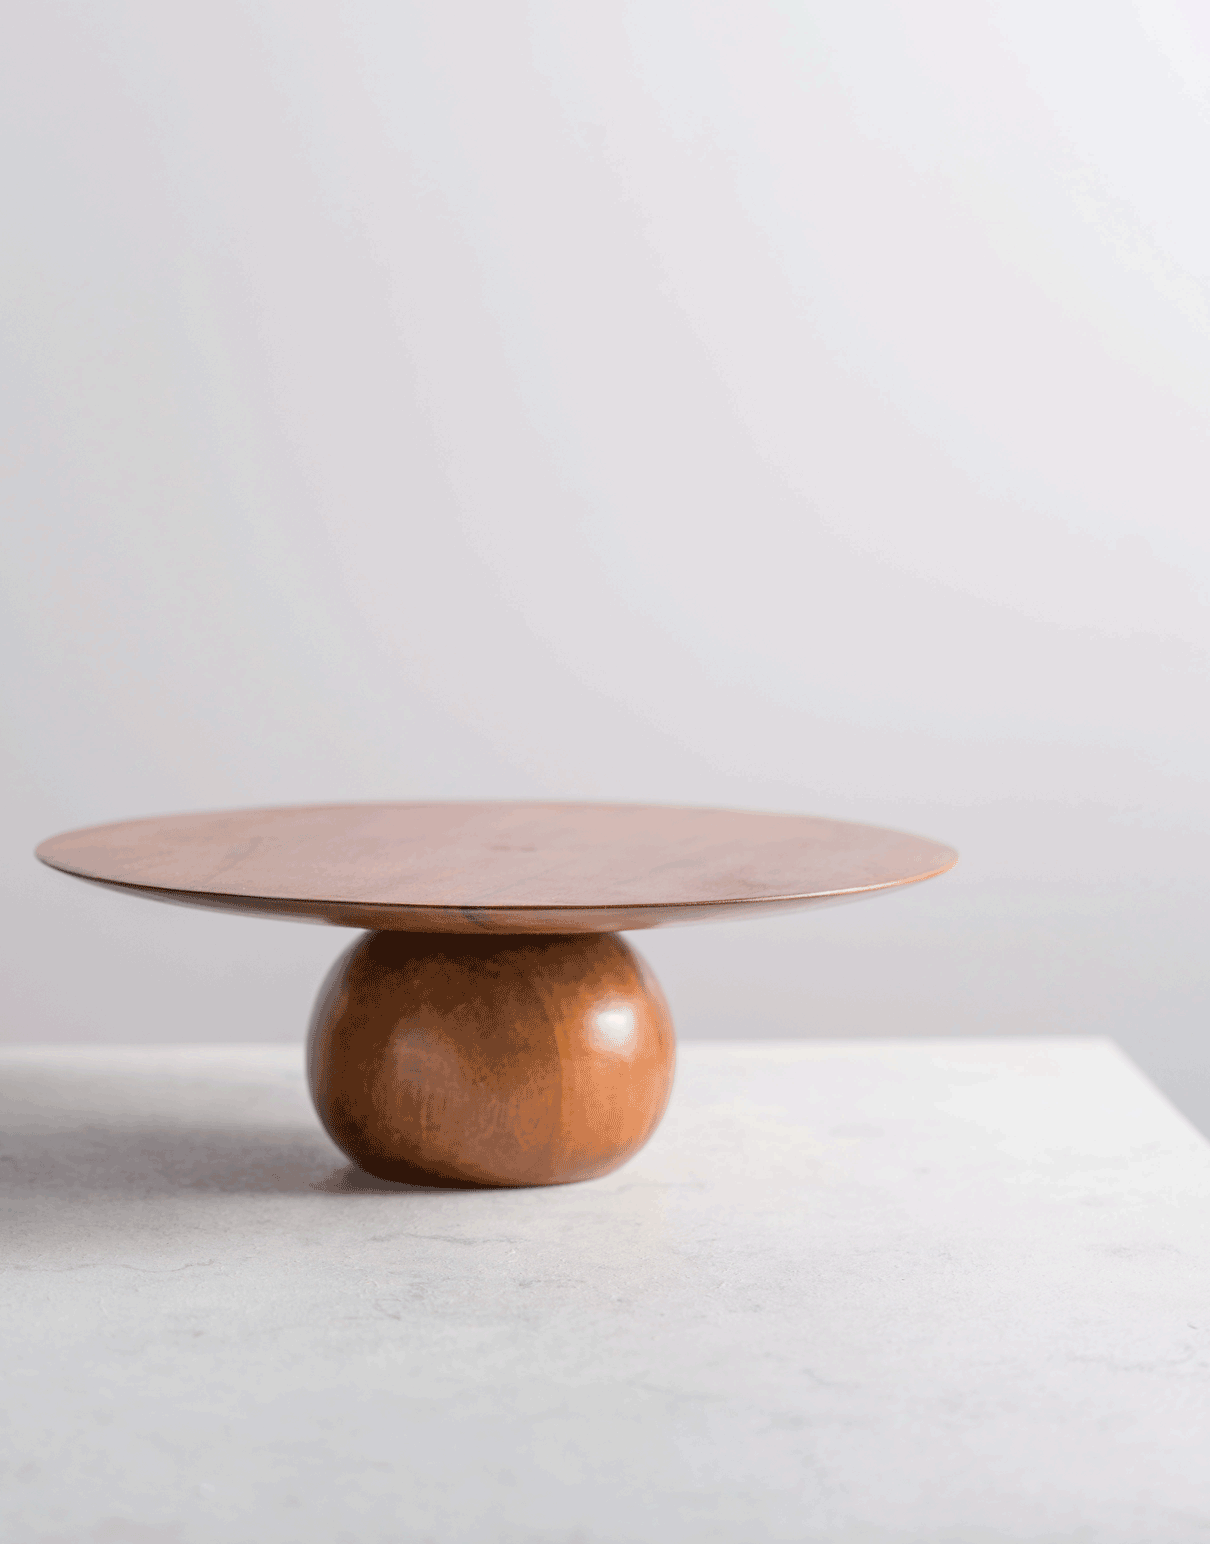 Loom - Unique wooden cake stand with cutters, a product by Araana Homes